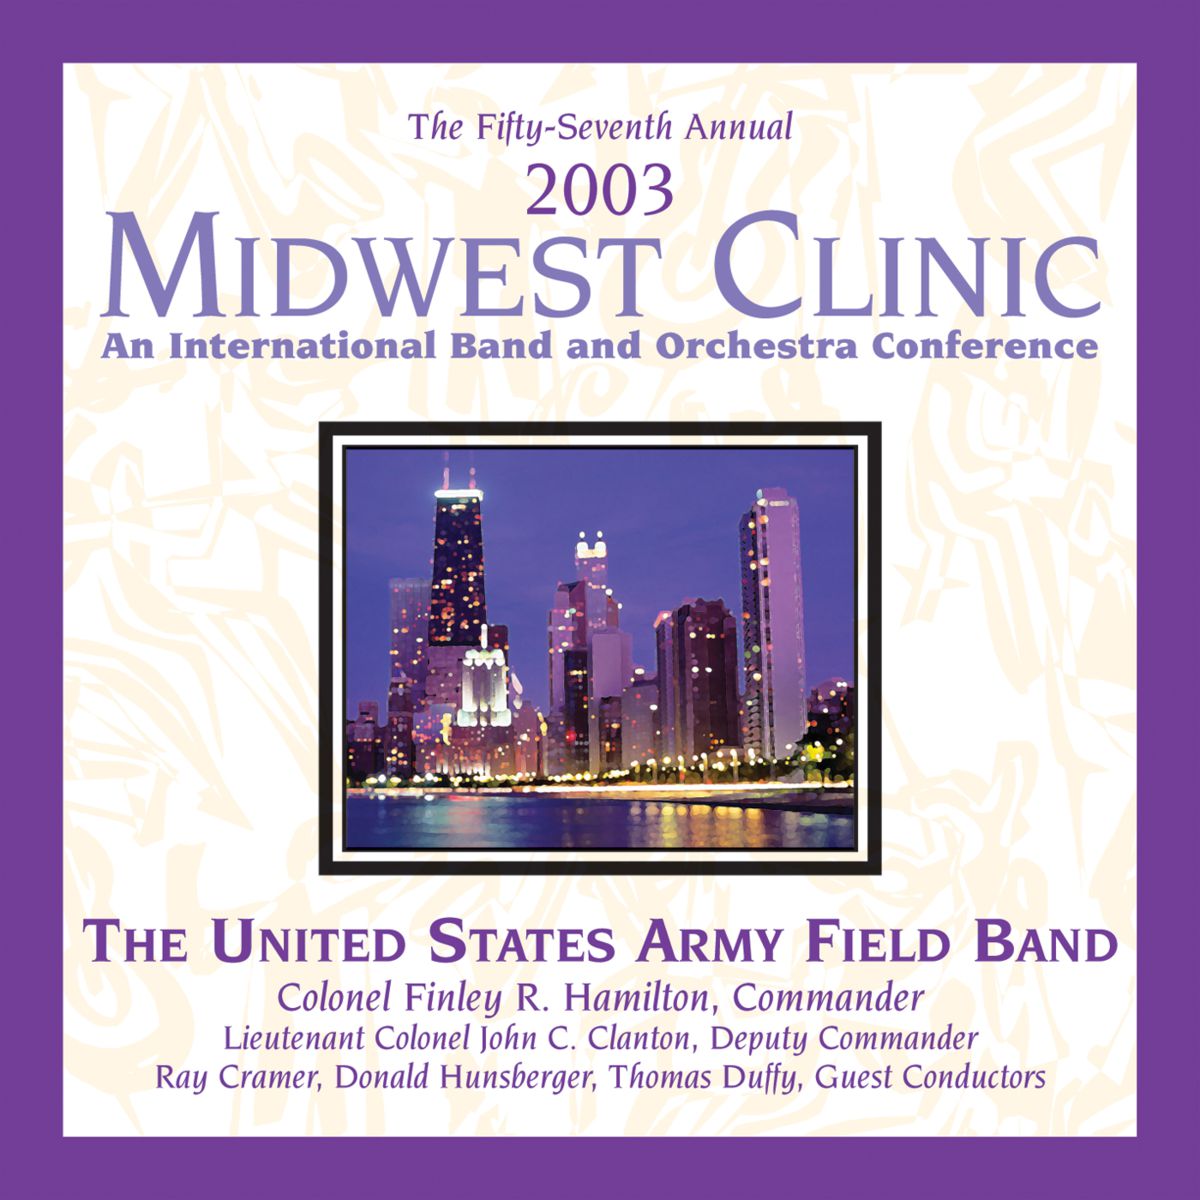 2003 Midwest Clinic: The United States Army Field Band - hacer clic aqu